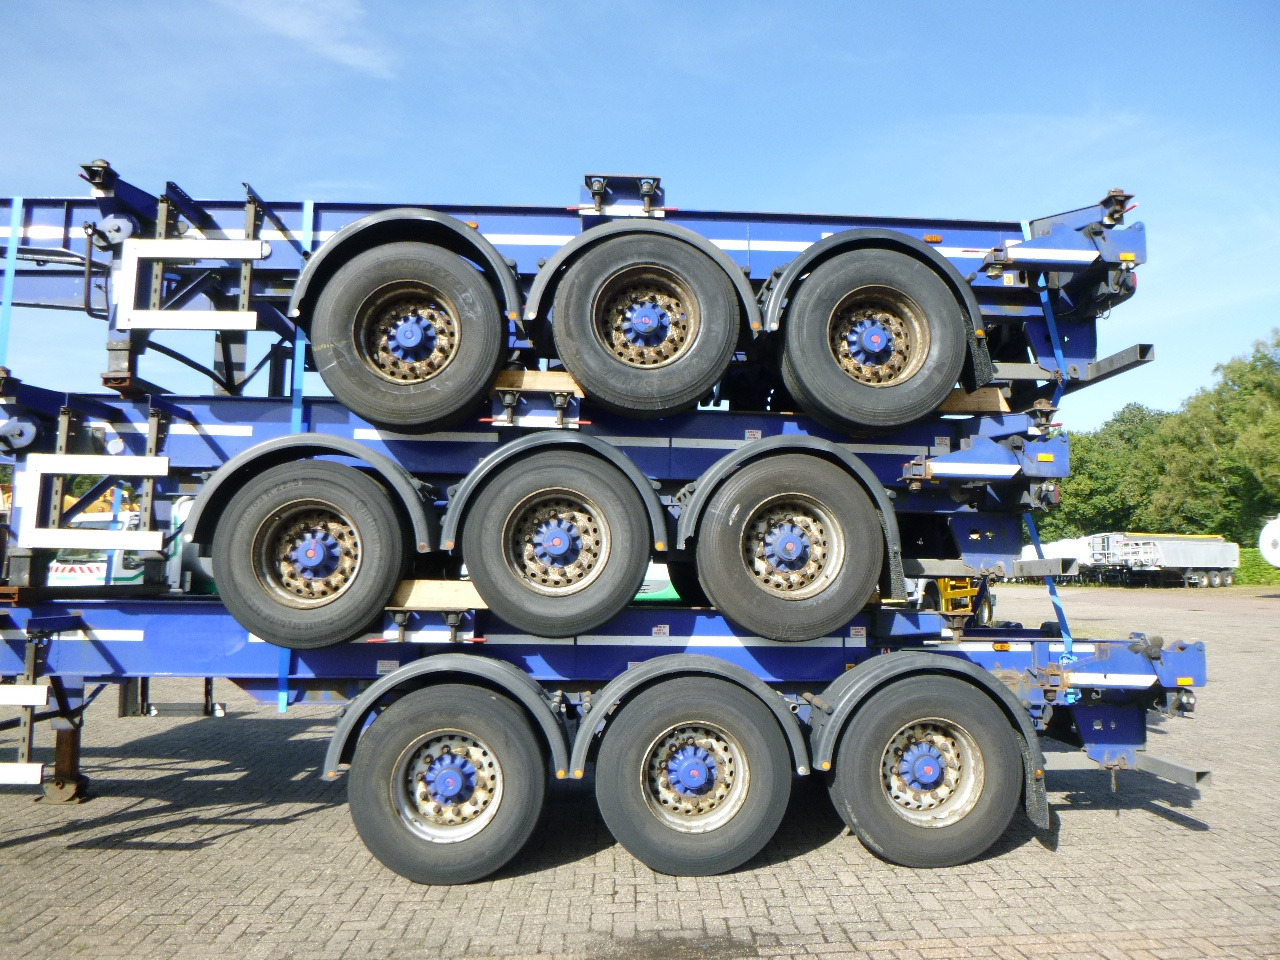 Dennison Stack - 3 x container trailer 20-30-40-45 ft إيجار Dennison Stack - 3 x container trailer 20-30-40-45 ft: صور 11